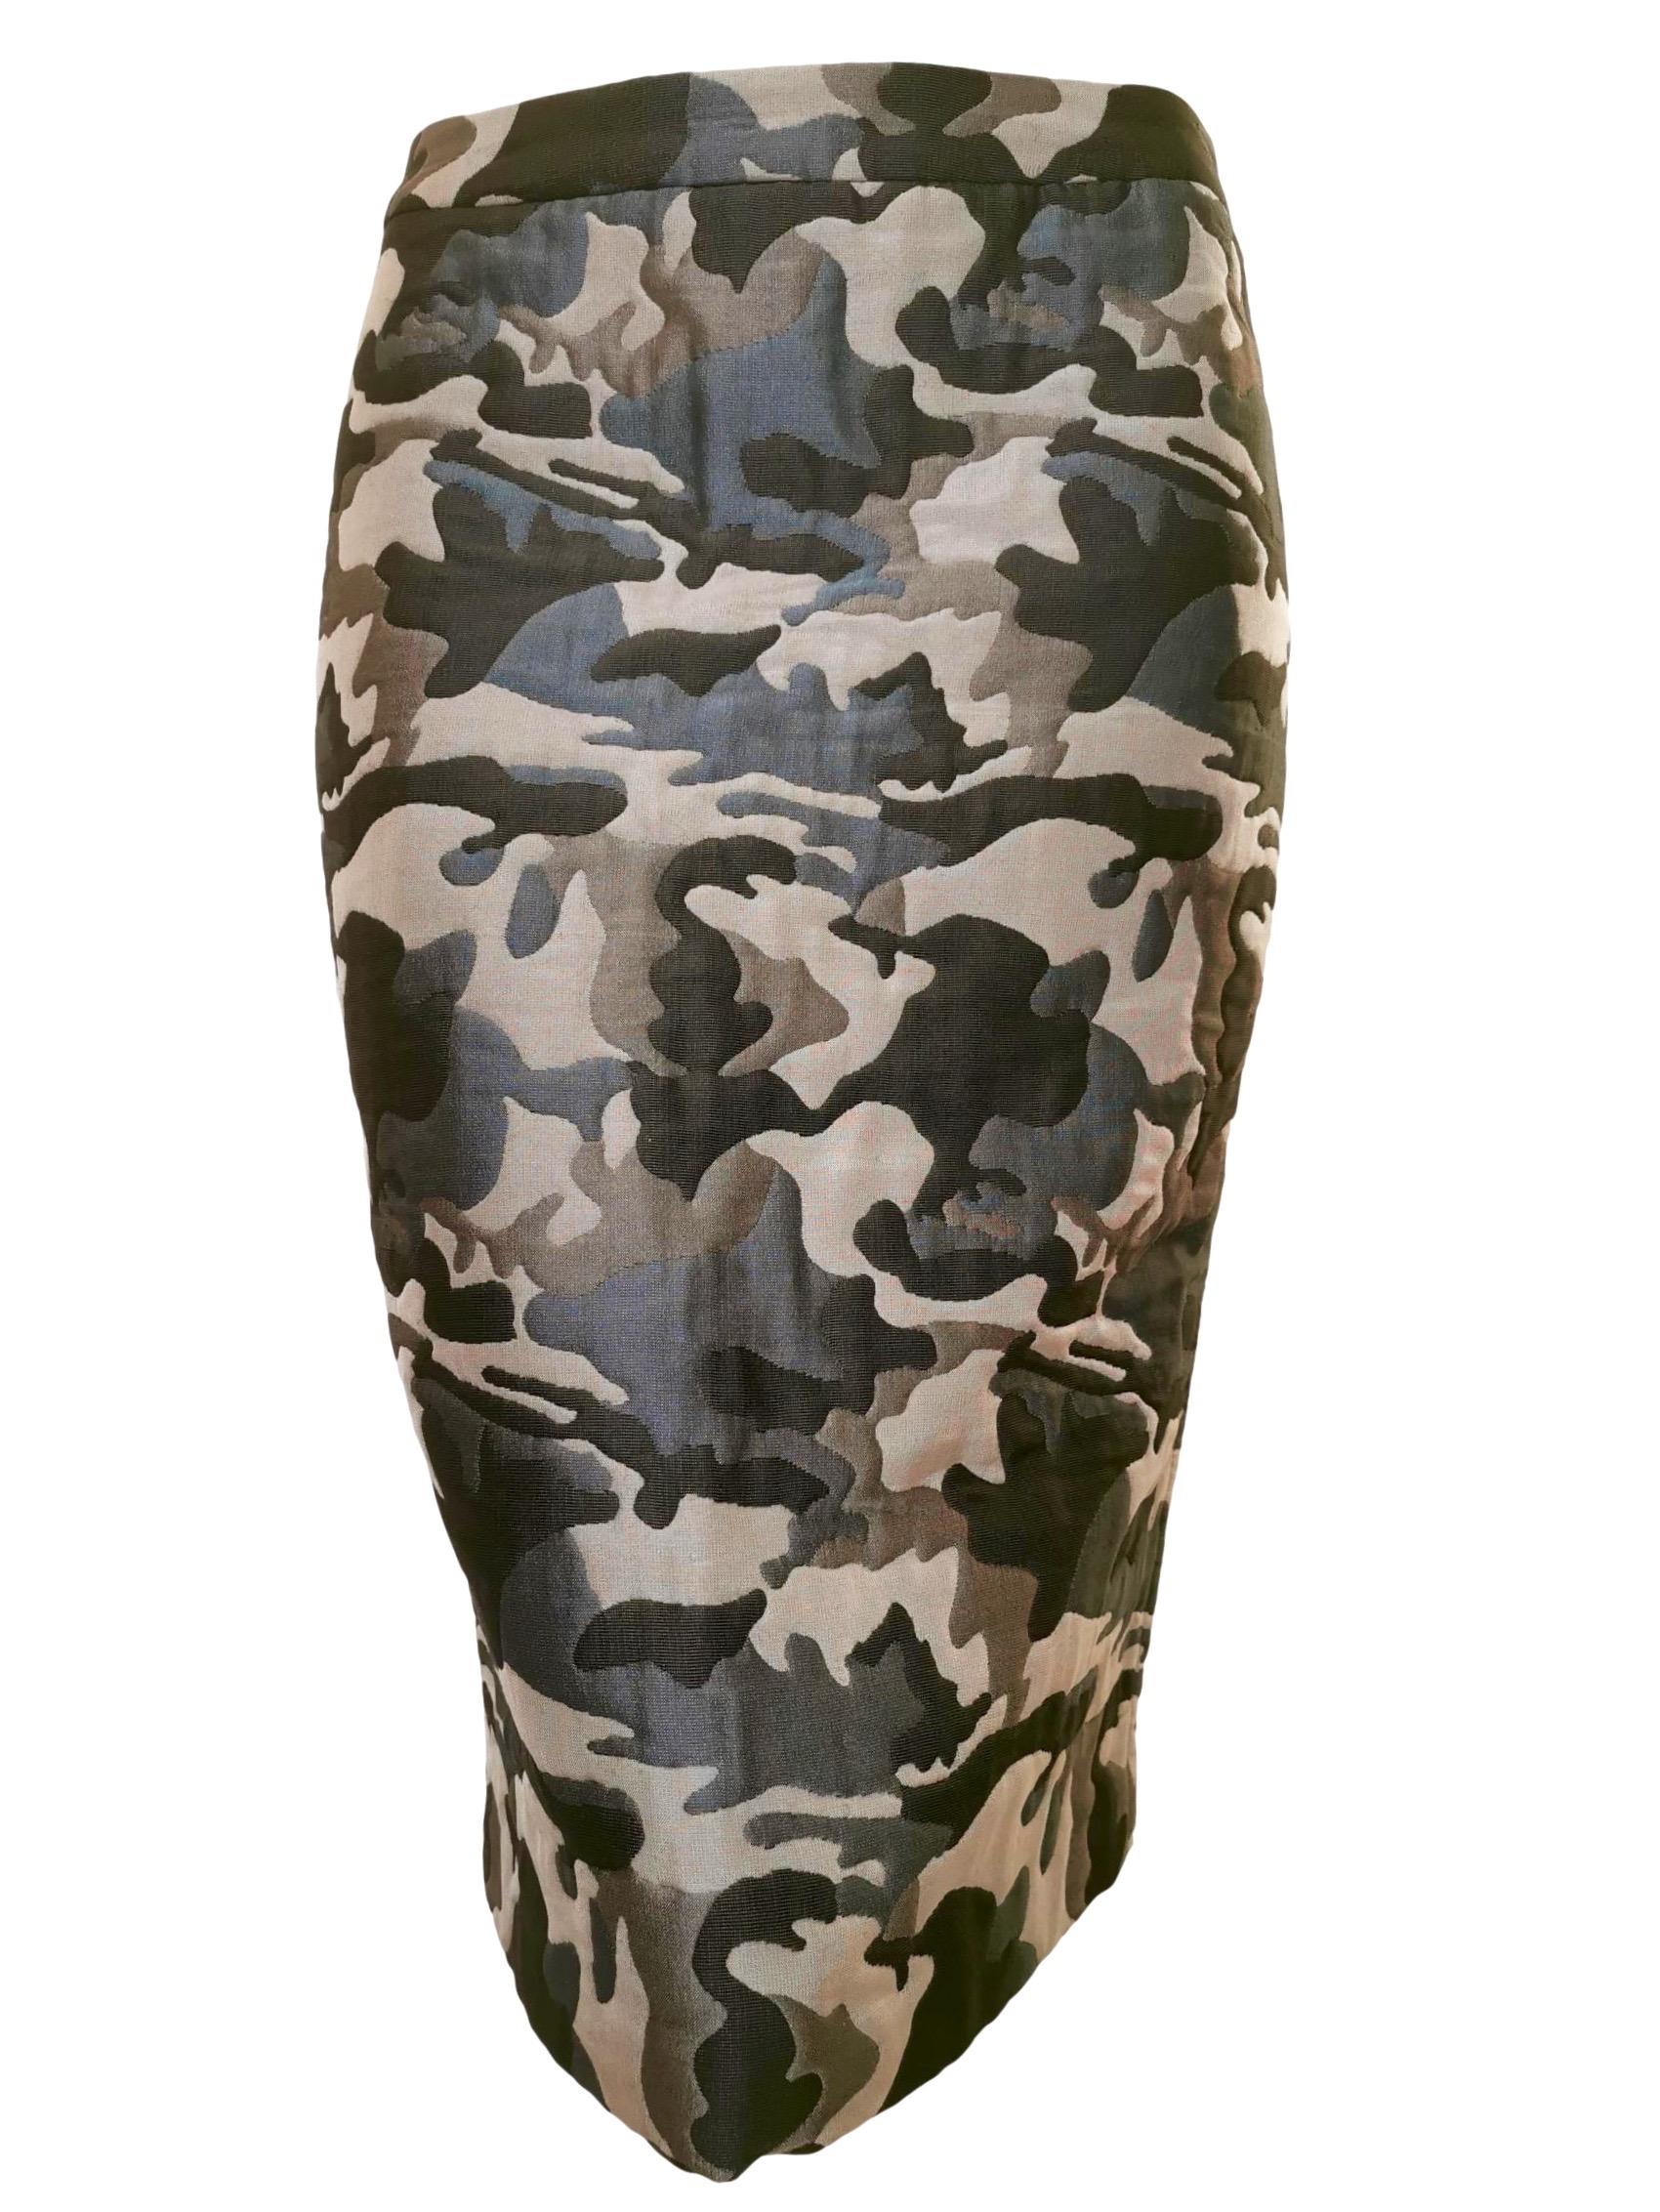 Alexander McQueen Vintage 1990's Quilted Camouflage Fitted Skirt  For Sale 2